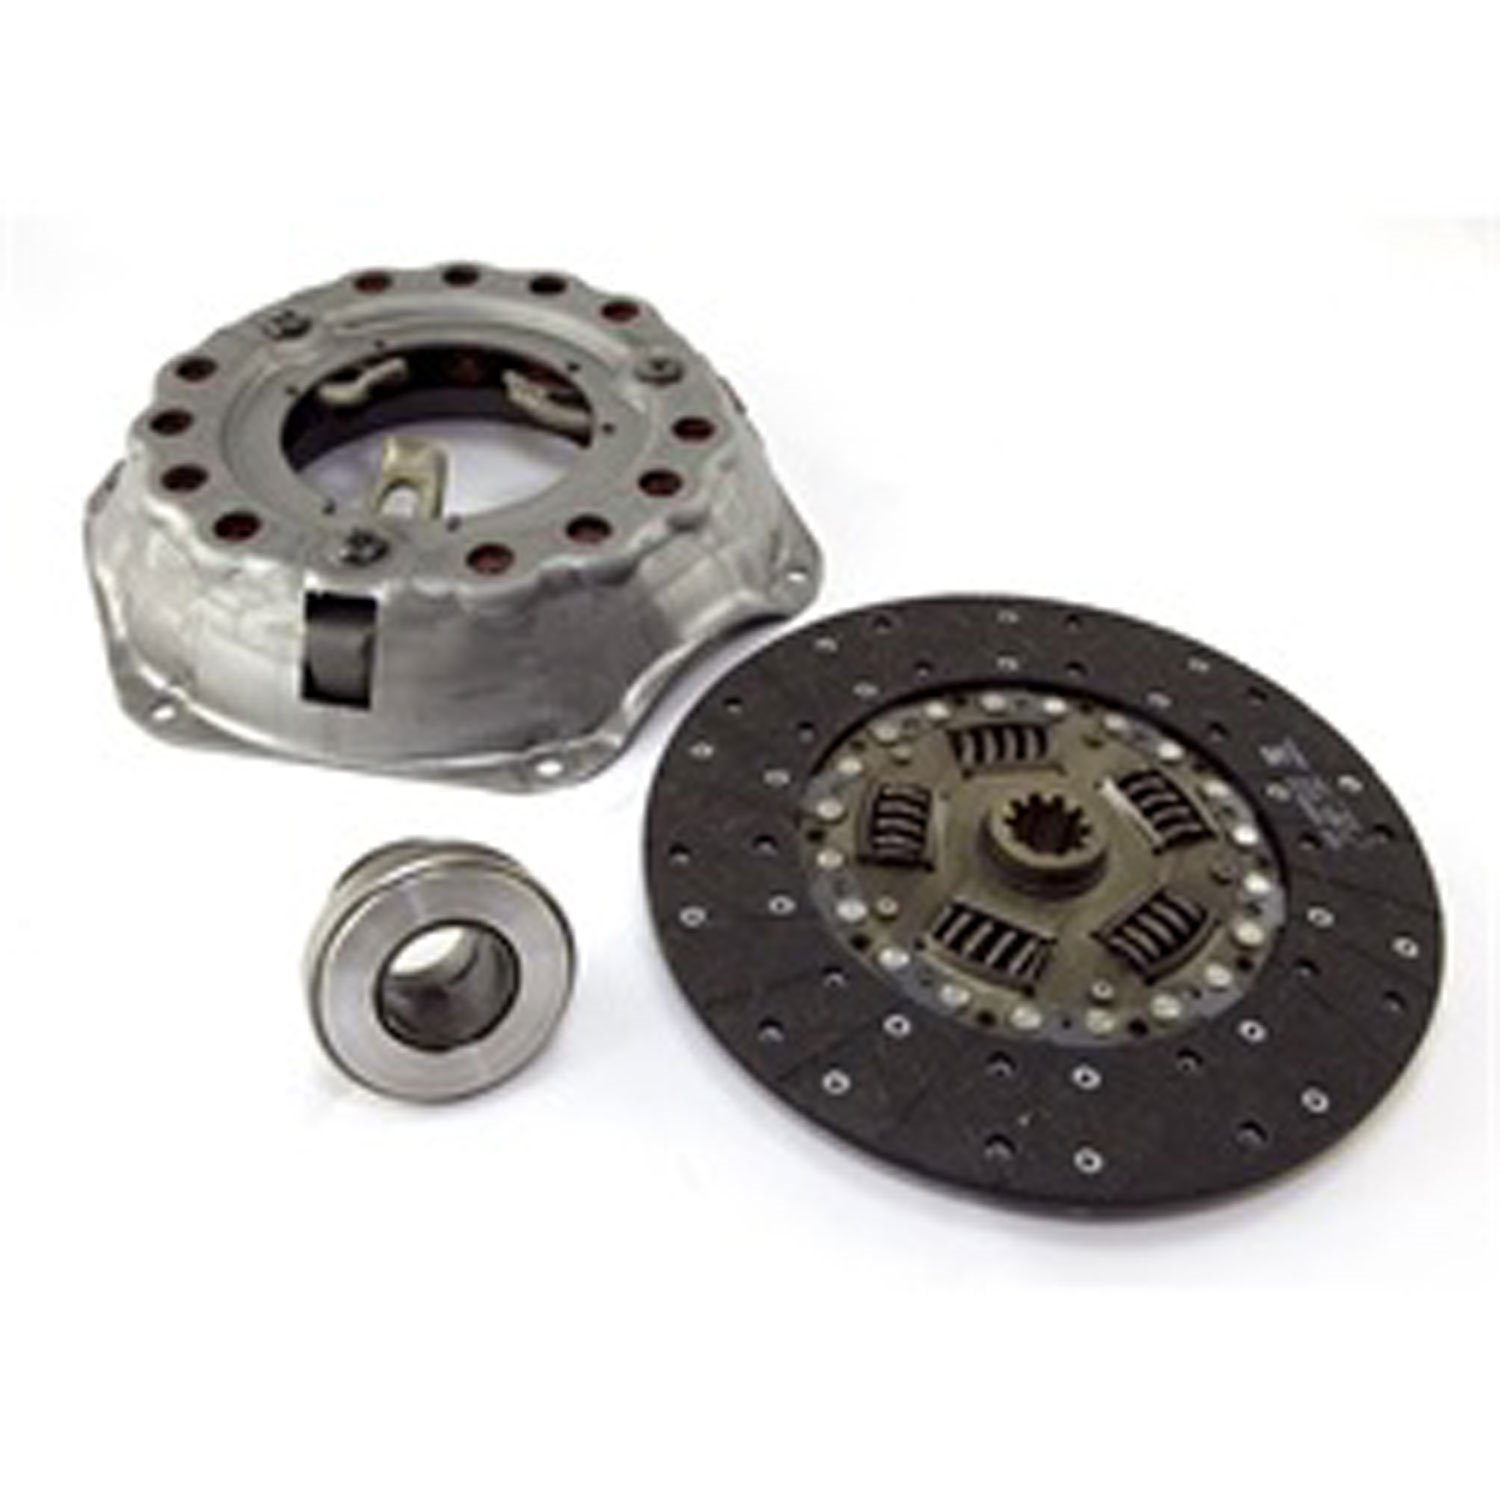 10.5 inch regular clutch kit for 72-75 Jeep CJ-5 and CJ-6 6-cylinder or 8-cylinder. Kit includes the